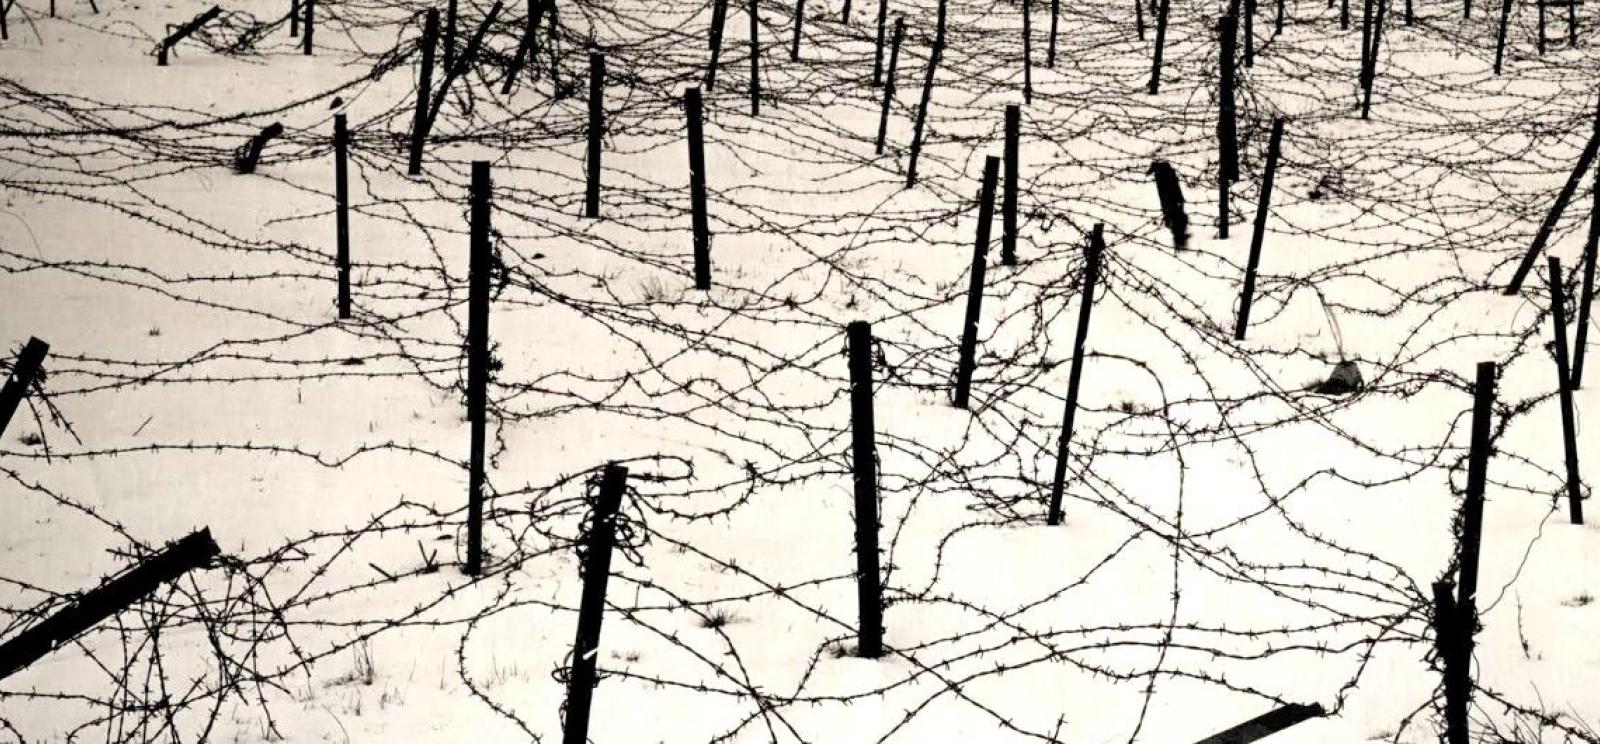 Black and white photograph of a snowy field covered in wooden stakes with barbed wire stretching between them in a spiky grid.